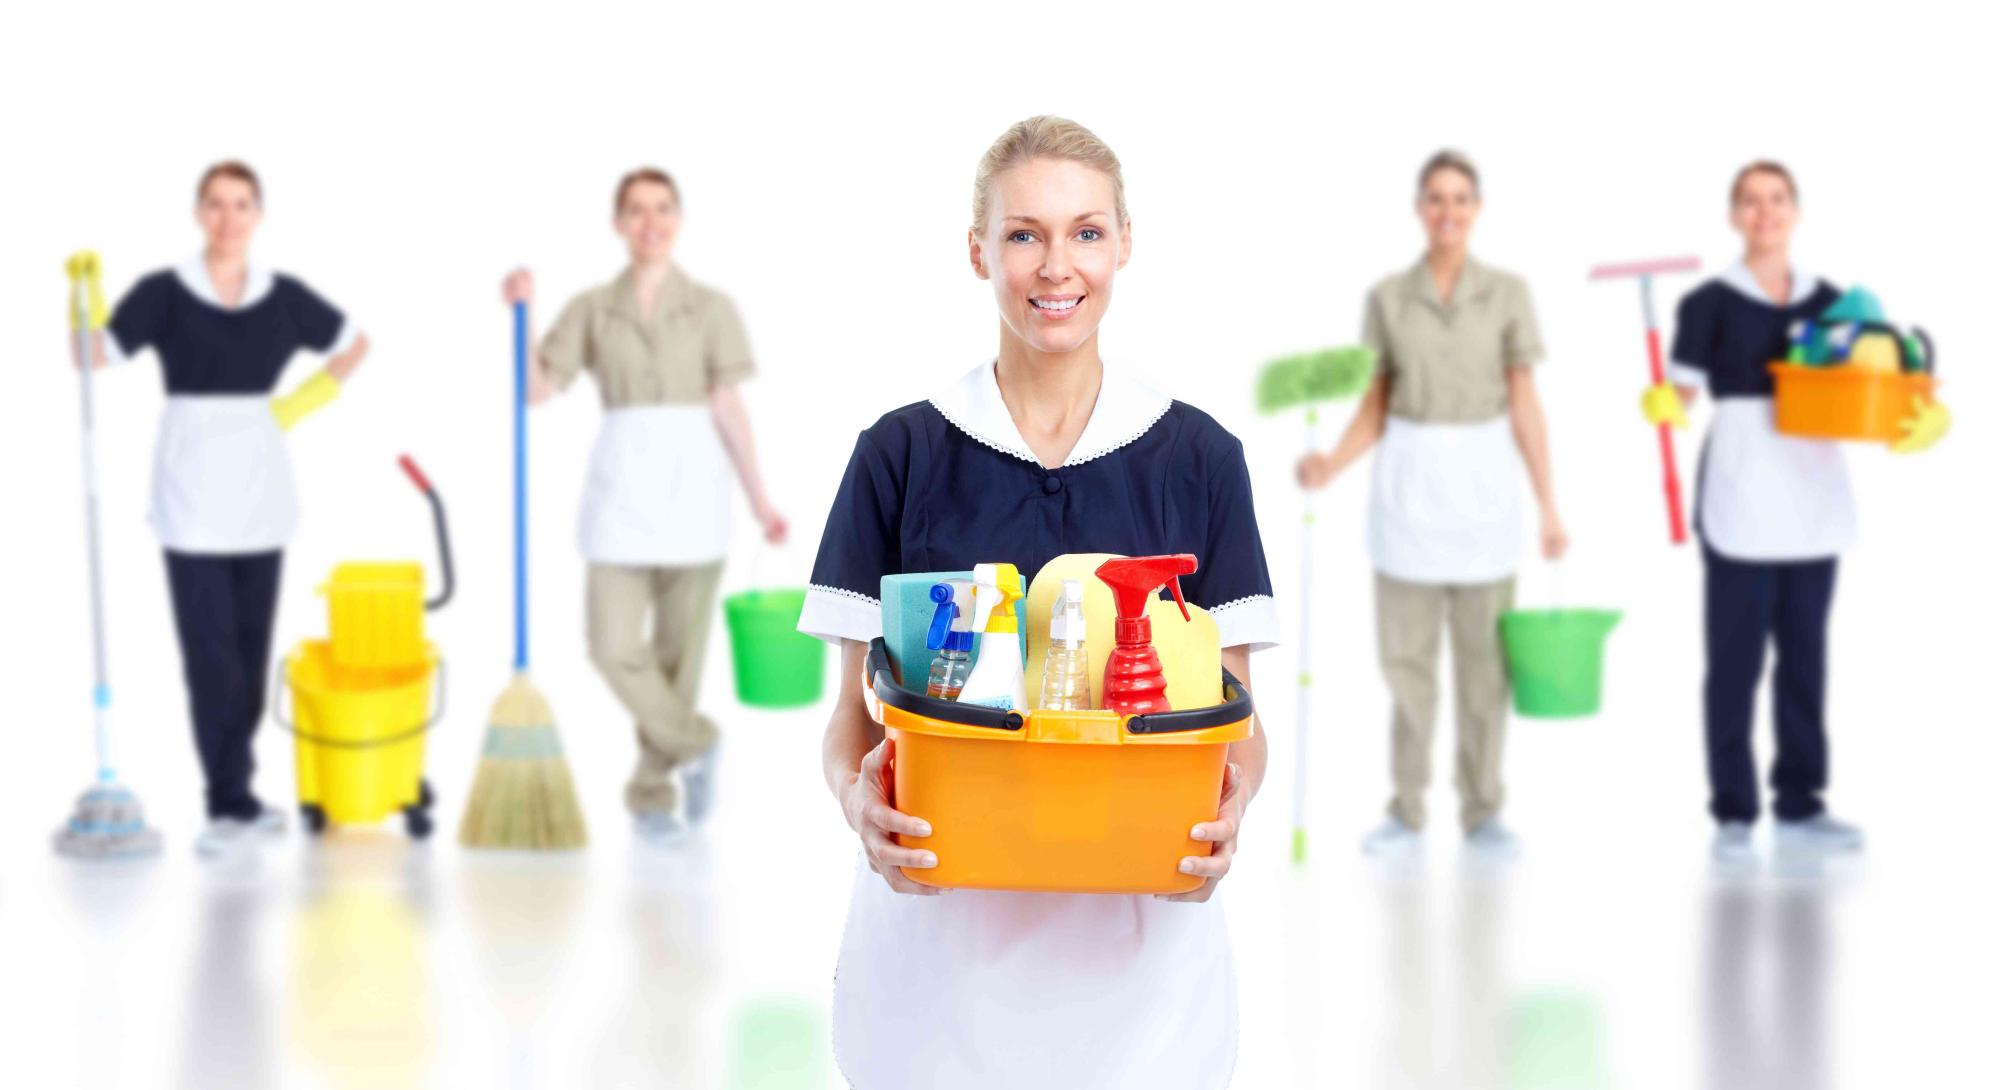 How To Hire The Best Janitorial Cleaning Services In Your Area